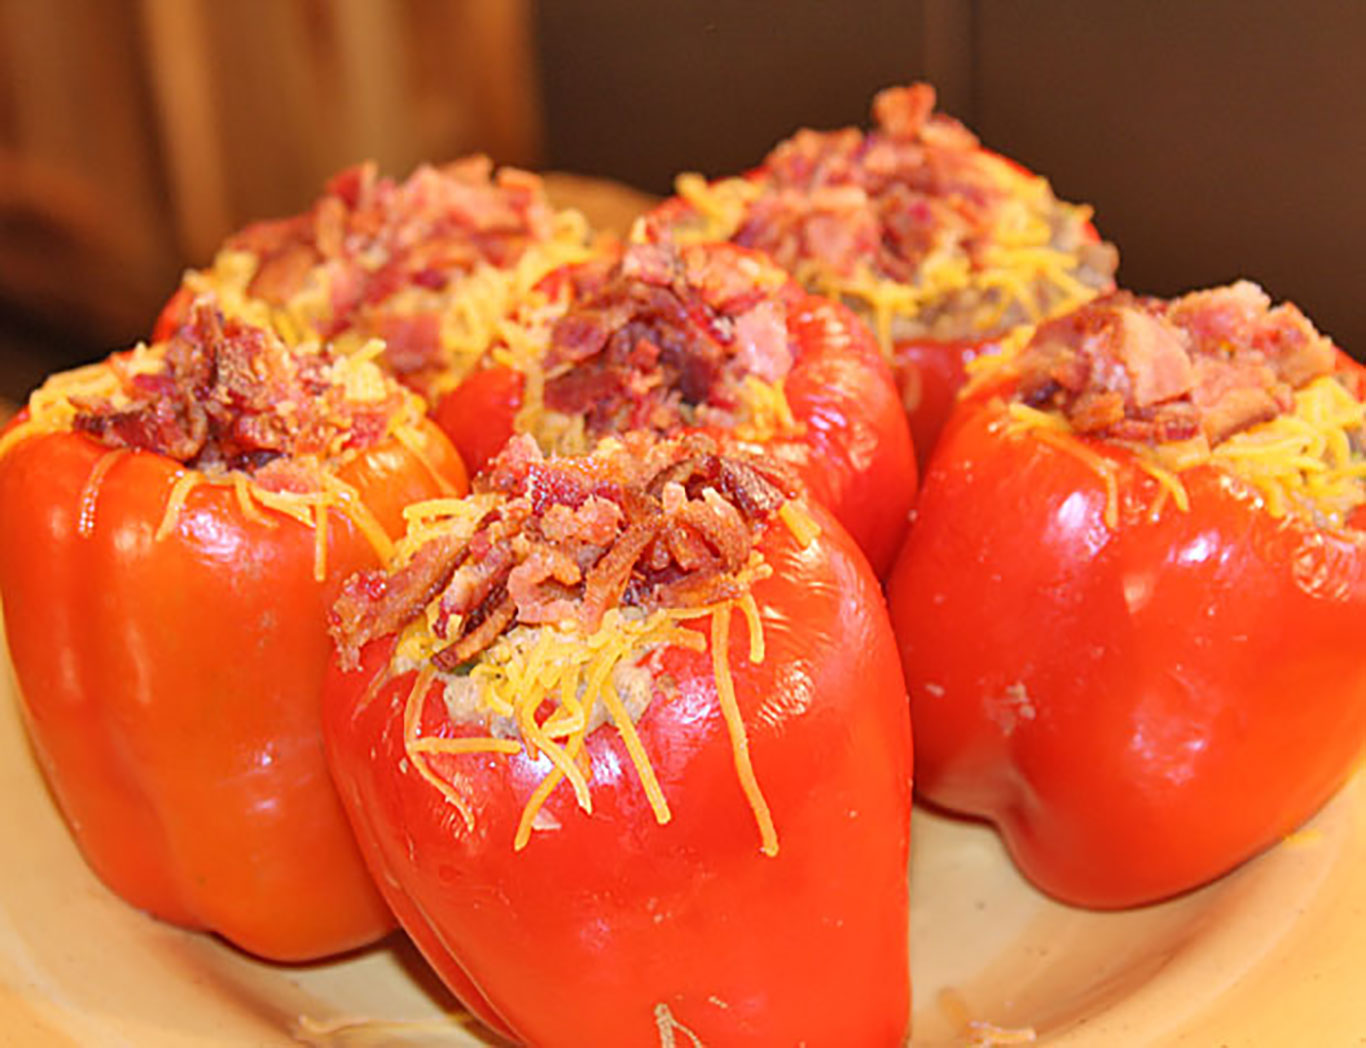 Venison and Crawfish Stuffed Bell Peppers Recipe